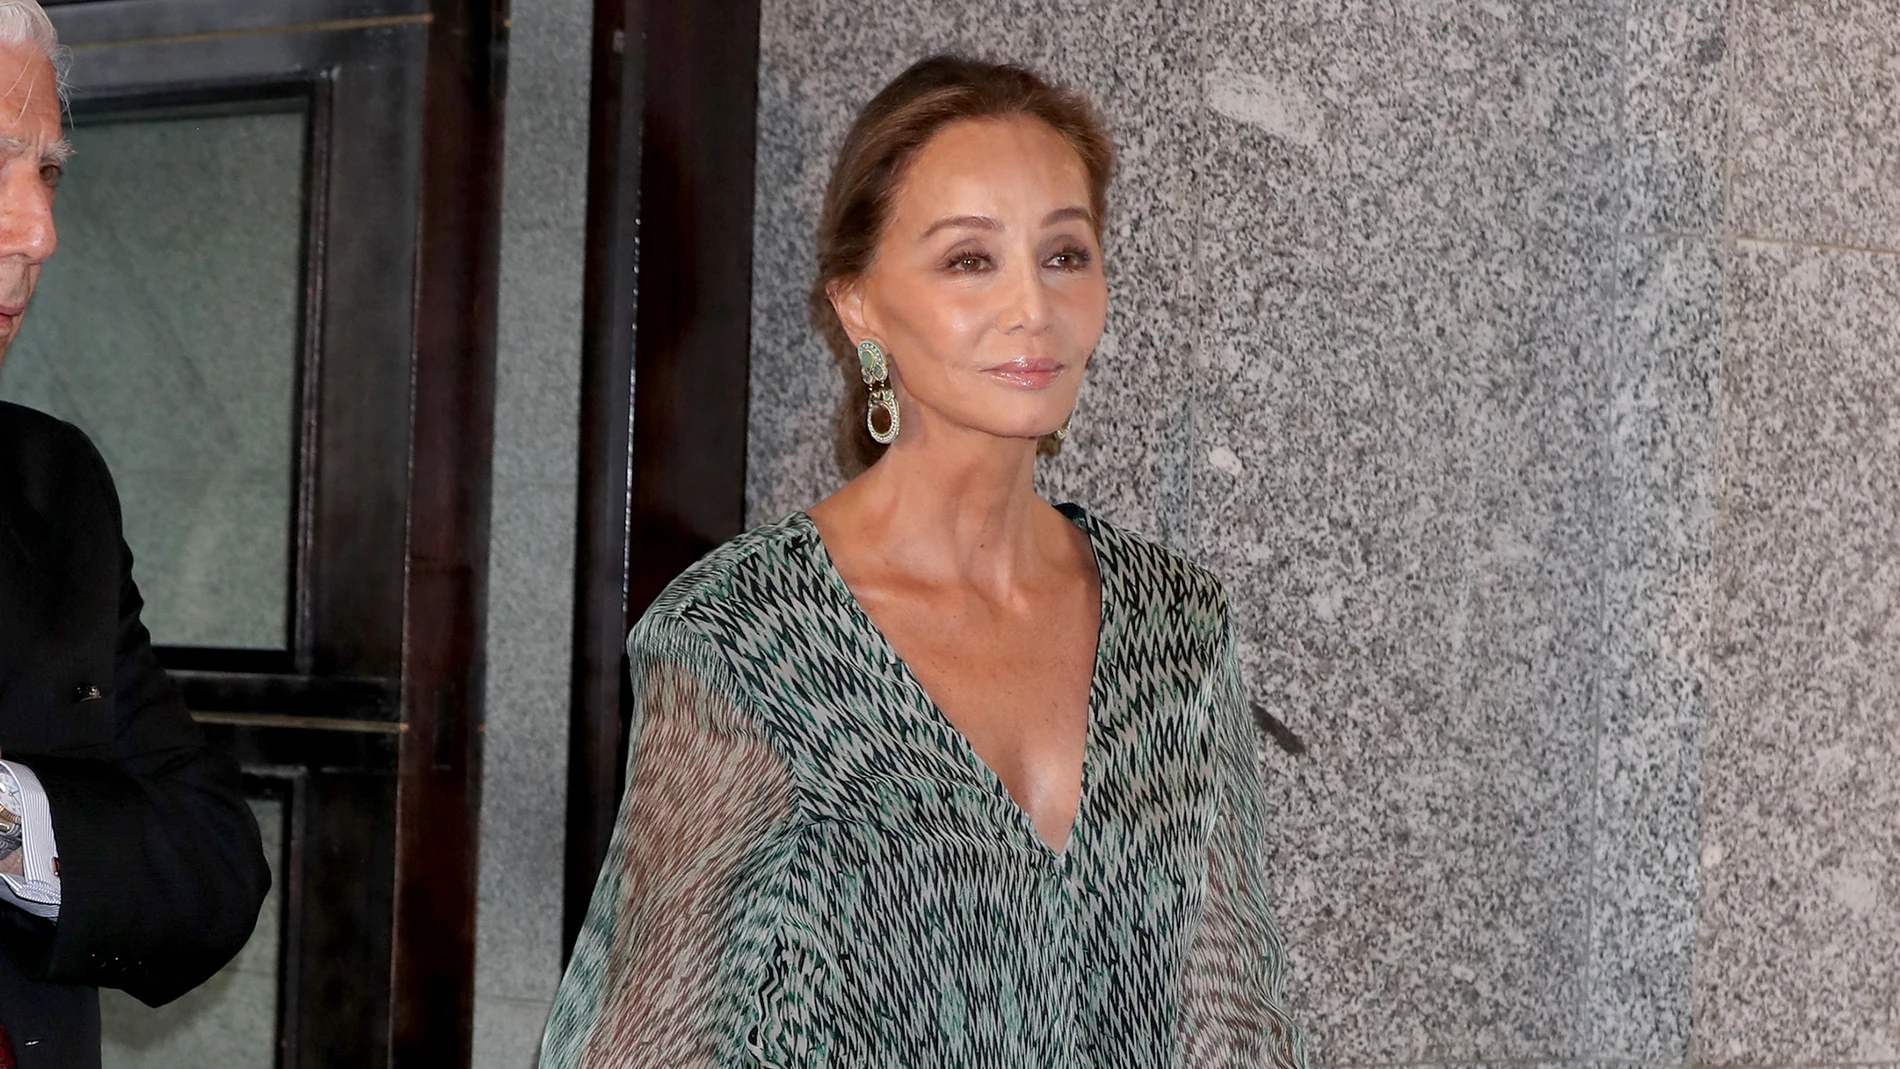 Isabel Preysler attending the opening of the season of the Royal Theatre 2019 / 2020 in Madrid.